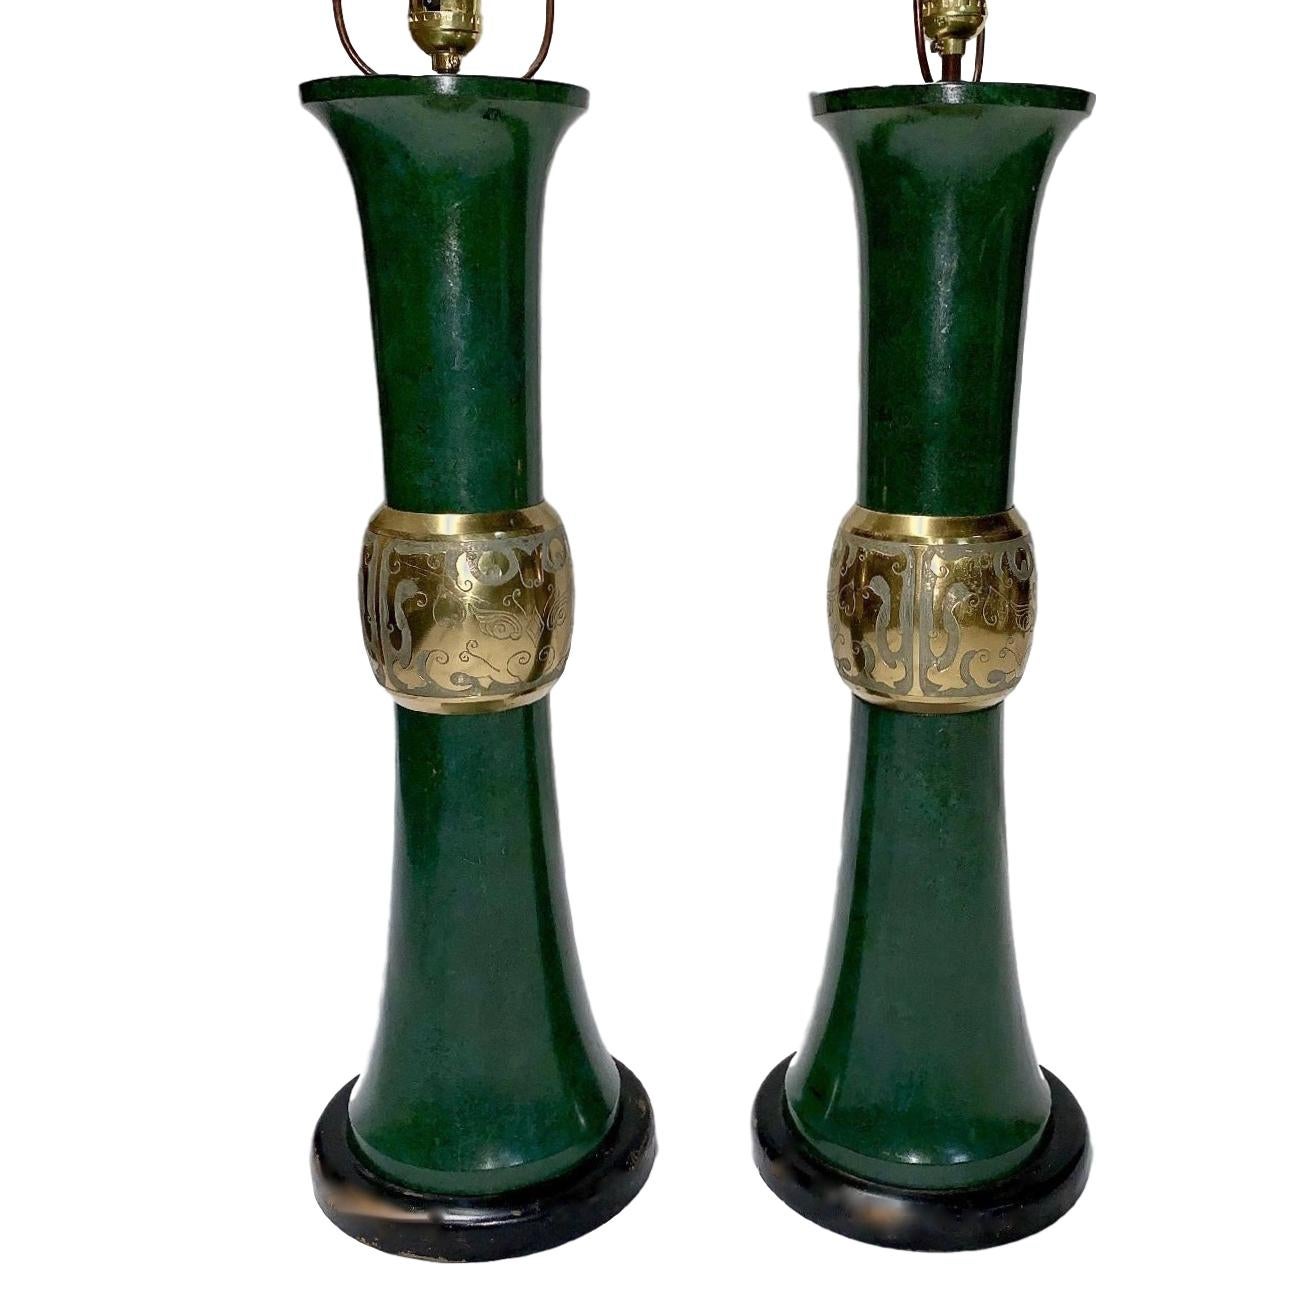 A pair of 1960s Italian patinated and lacquered bronze table lamps with Asian motif.

Measurements:
24